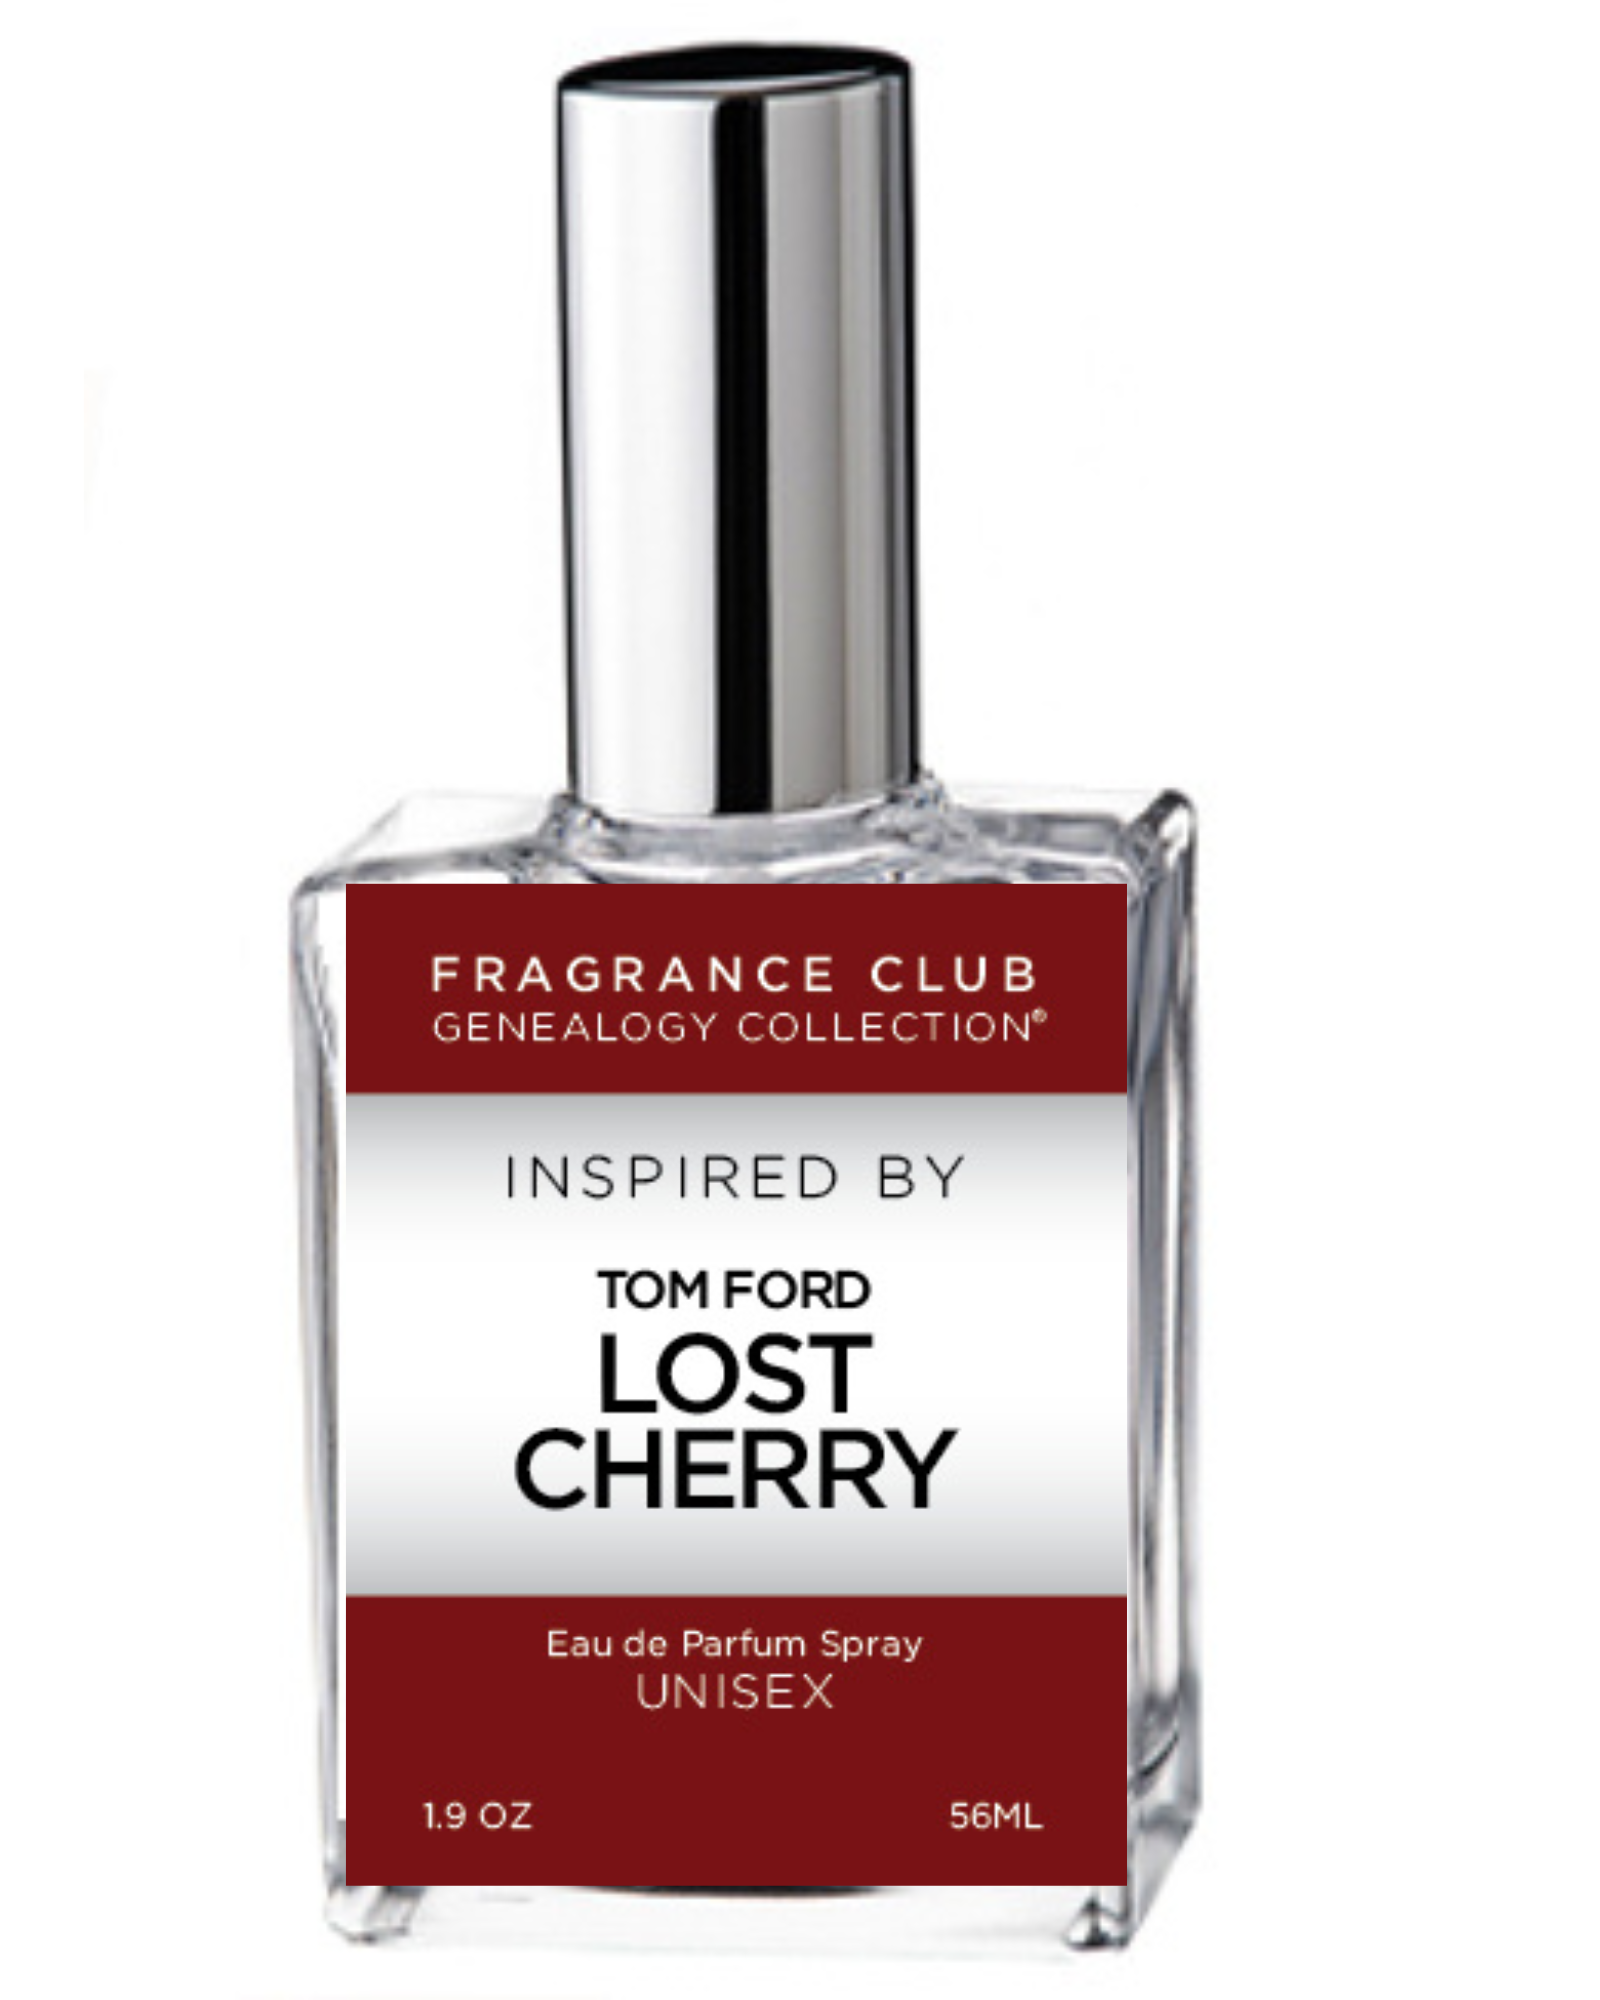 Tom Ford Lost Cherry Perfume by Tom Ford